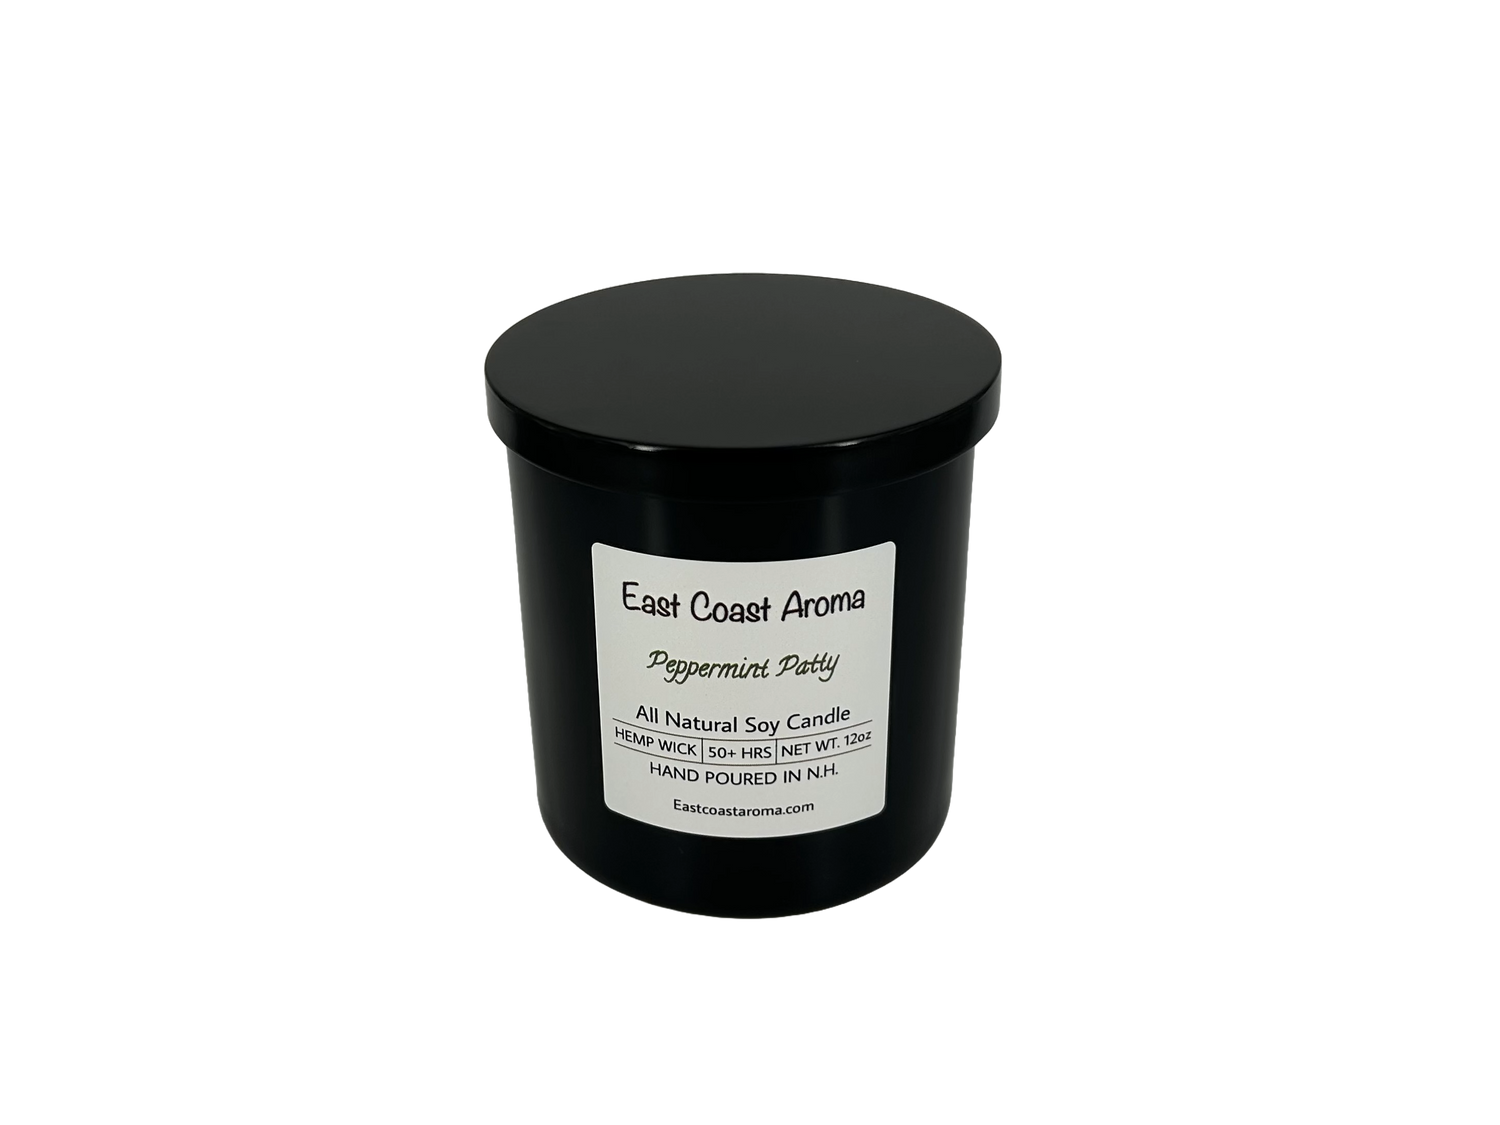 12oz Peppermint Patty Soy Candle